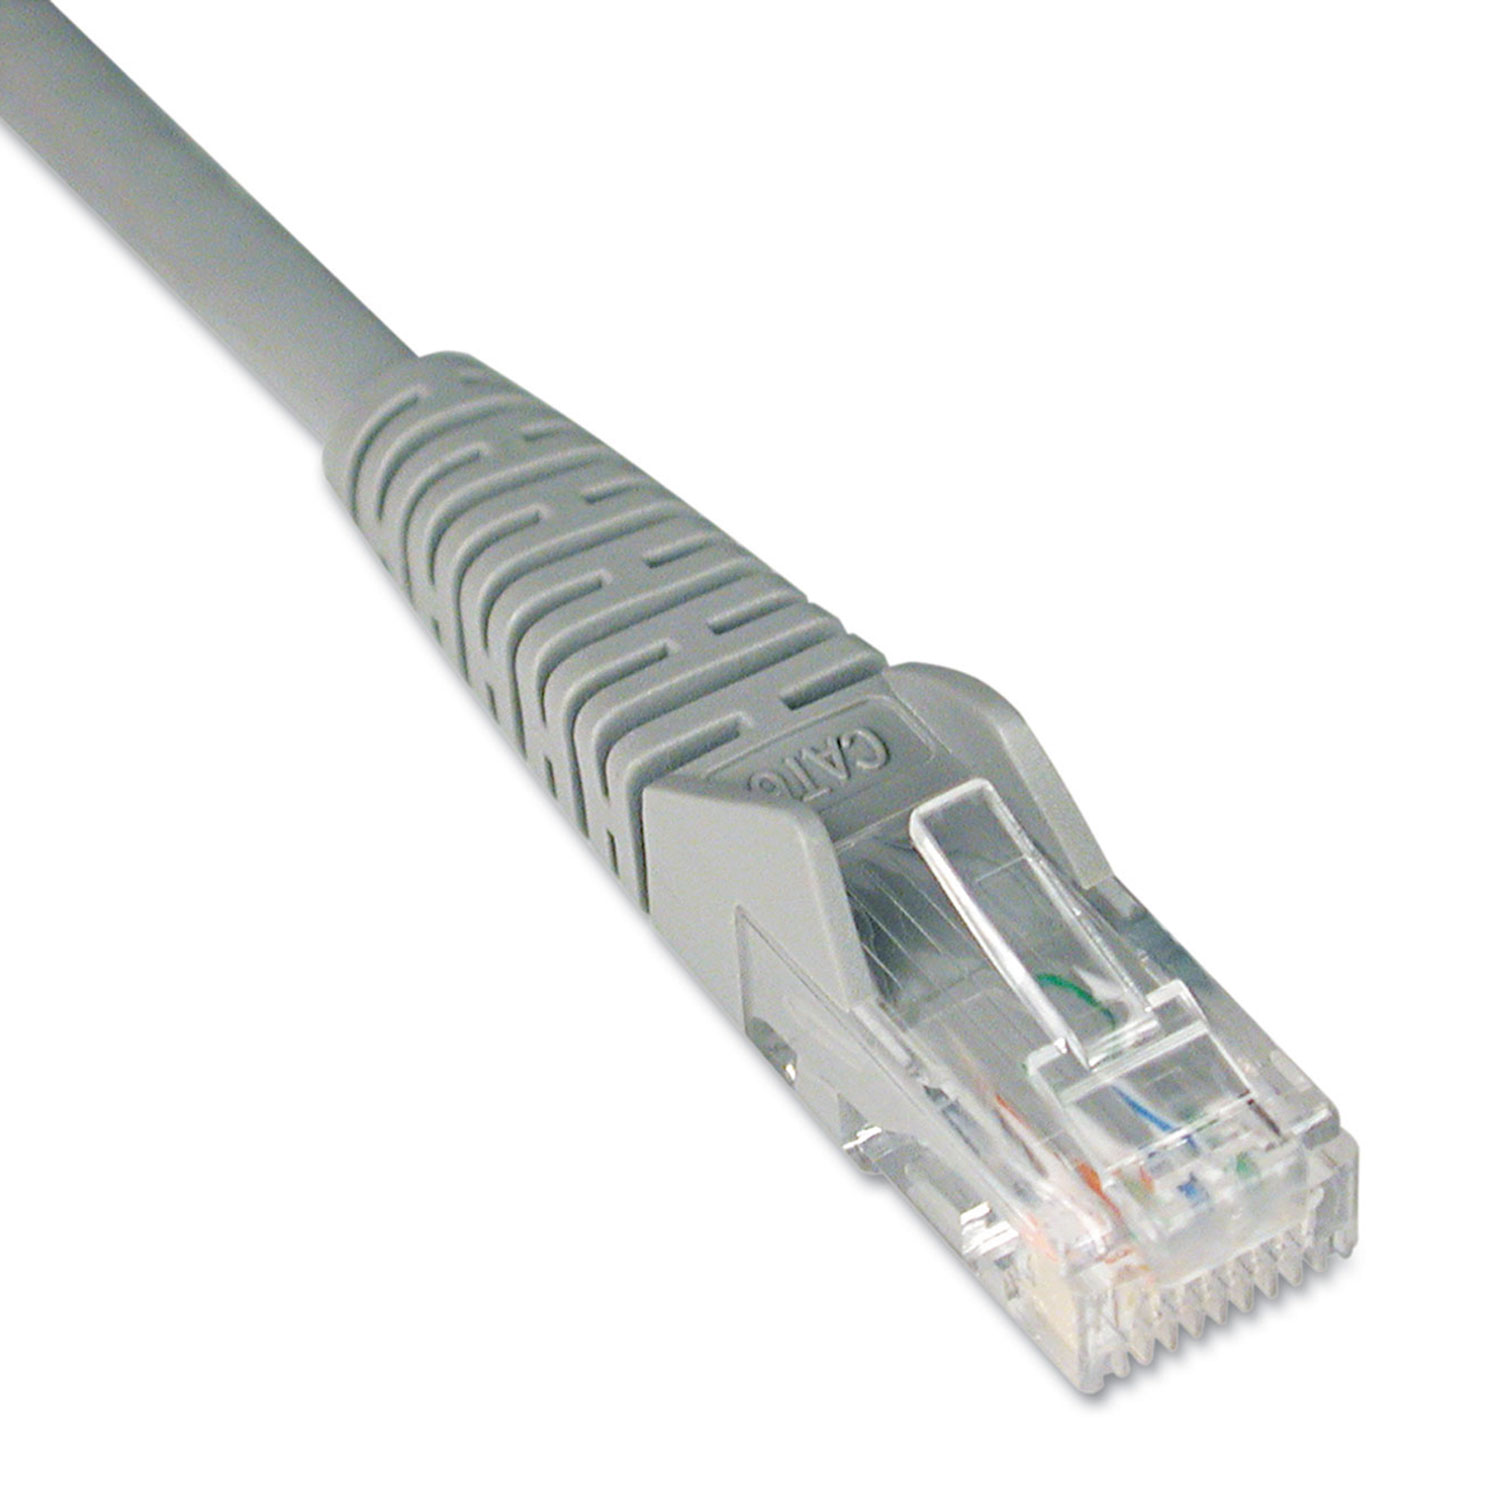  Tripp Lite N201-014-GY Cat6 Gigabit Snagless Molded Patch Cable, RJ45 (M/M), 14 ft., Gray (TRPN201014GY) 